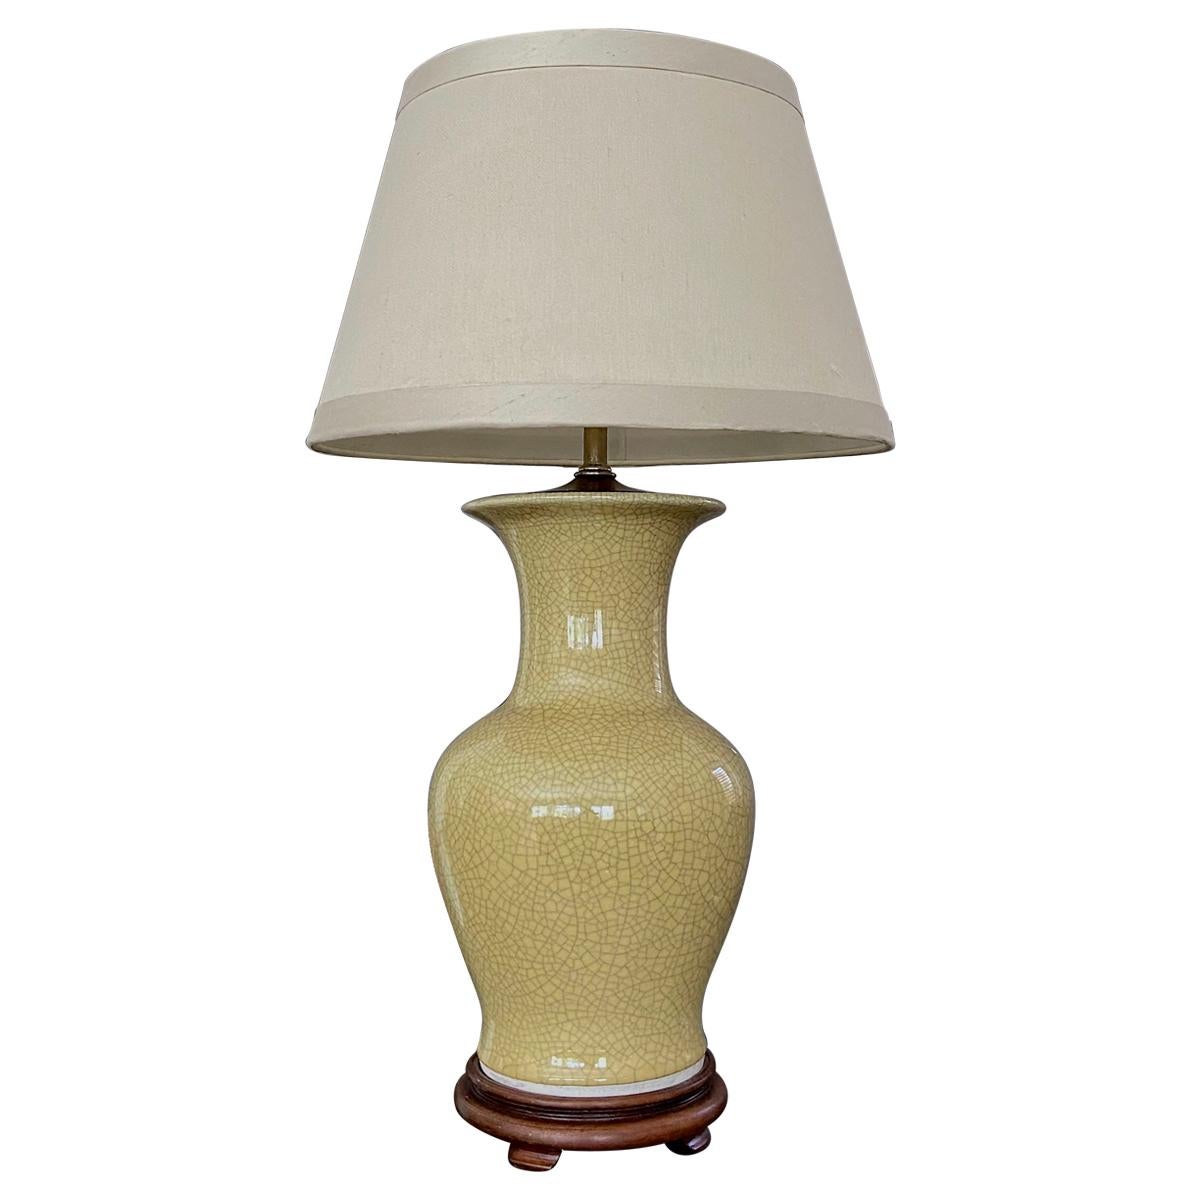 Single Japanese Asian Yellow Crackle Porcelain Table Lamp For Sale